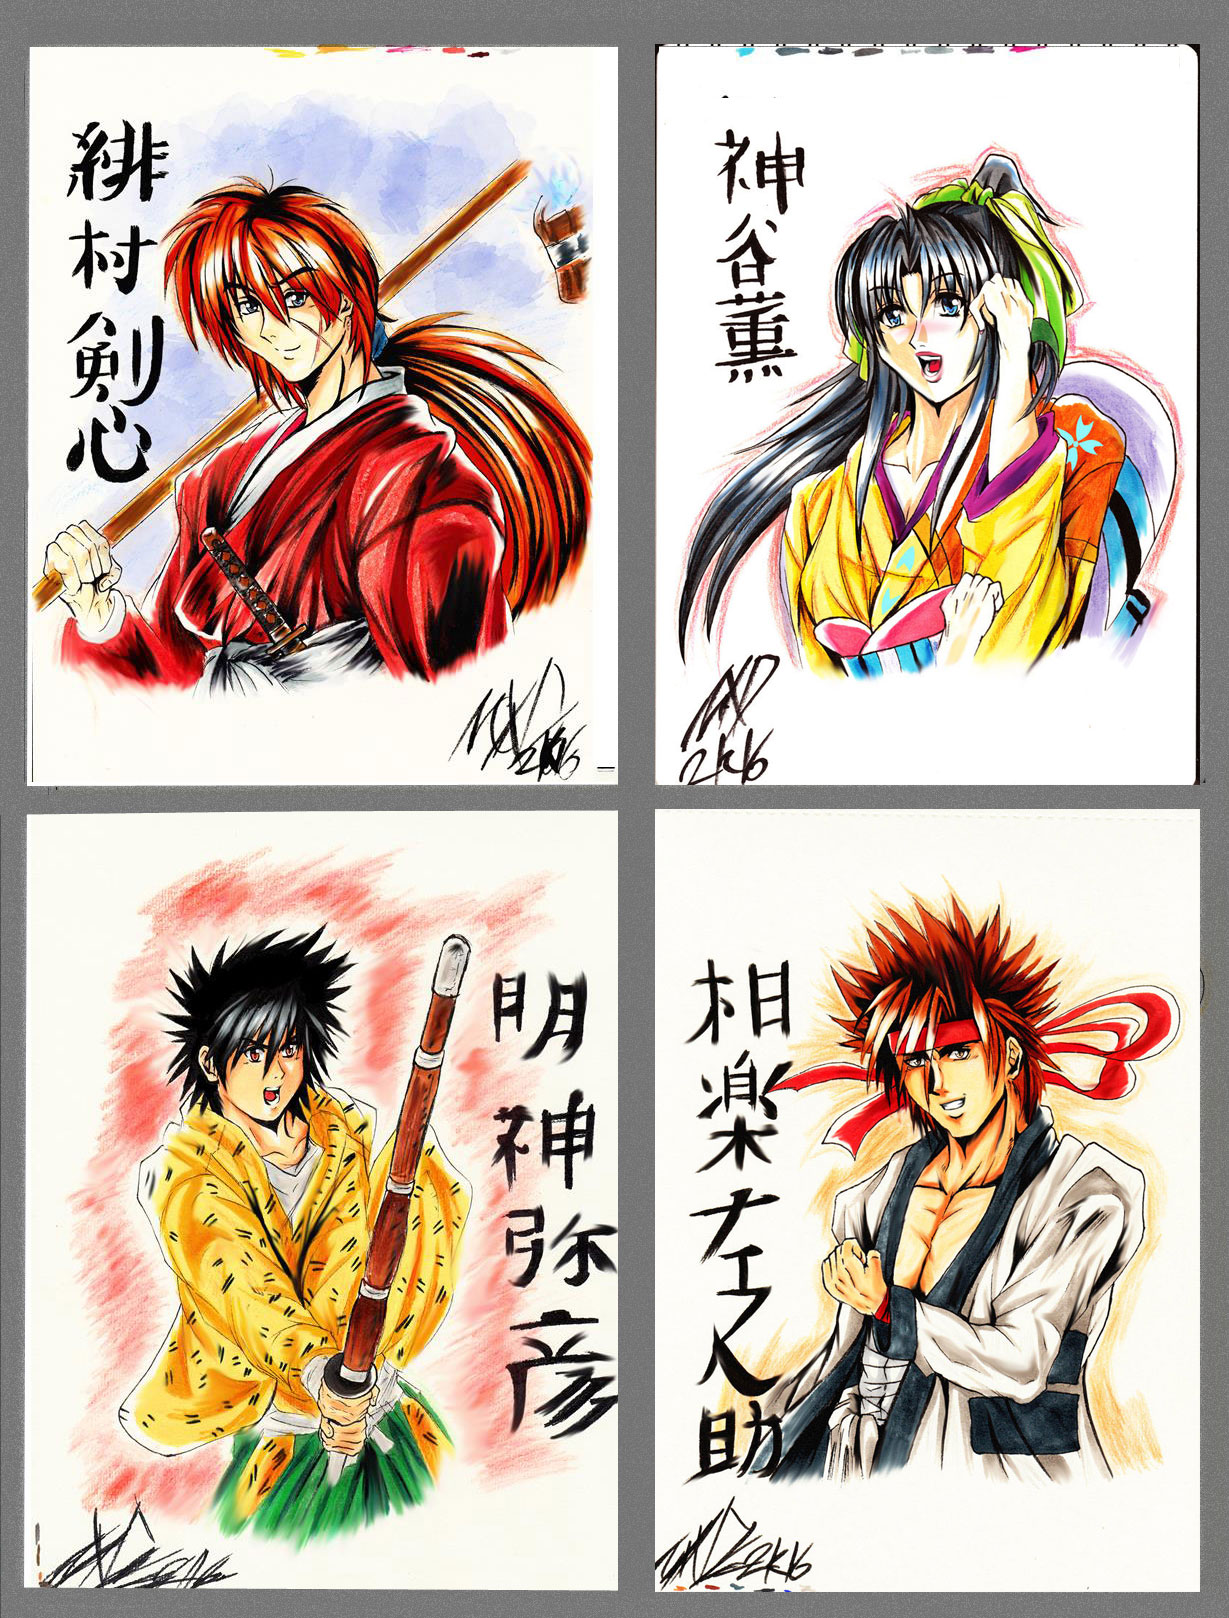 Rurouni Kenshin characters colored (REMAKE 2016) by Penzoom on DeviantArt